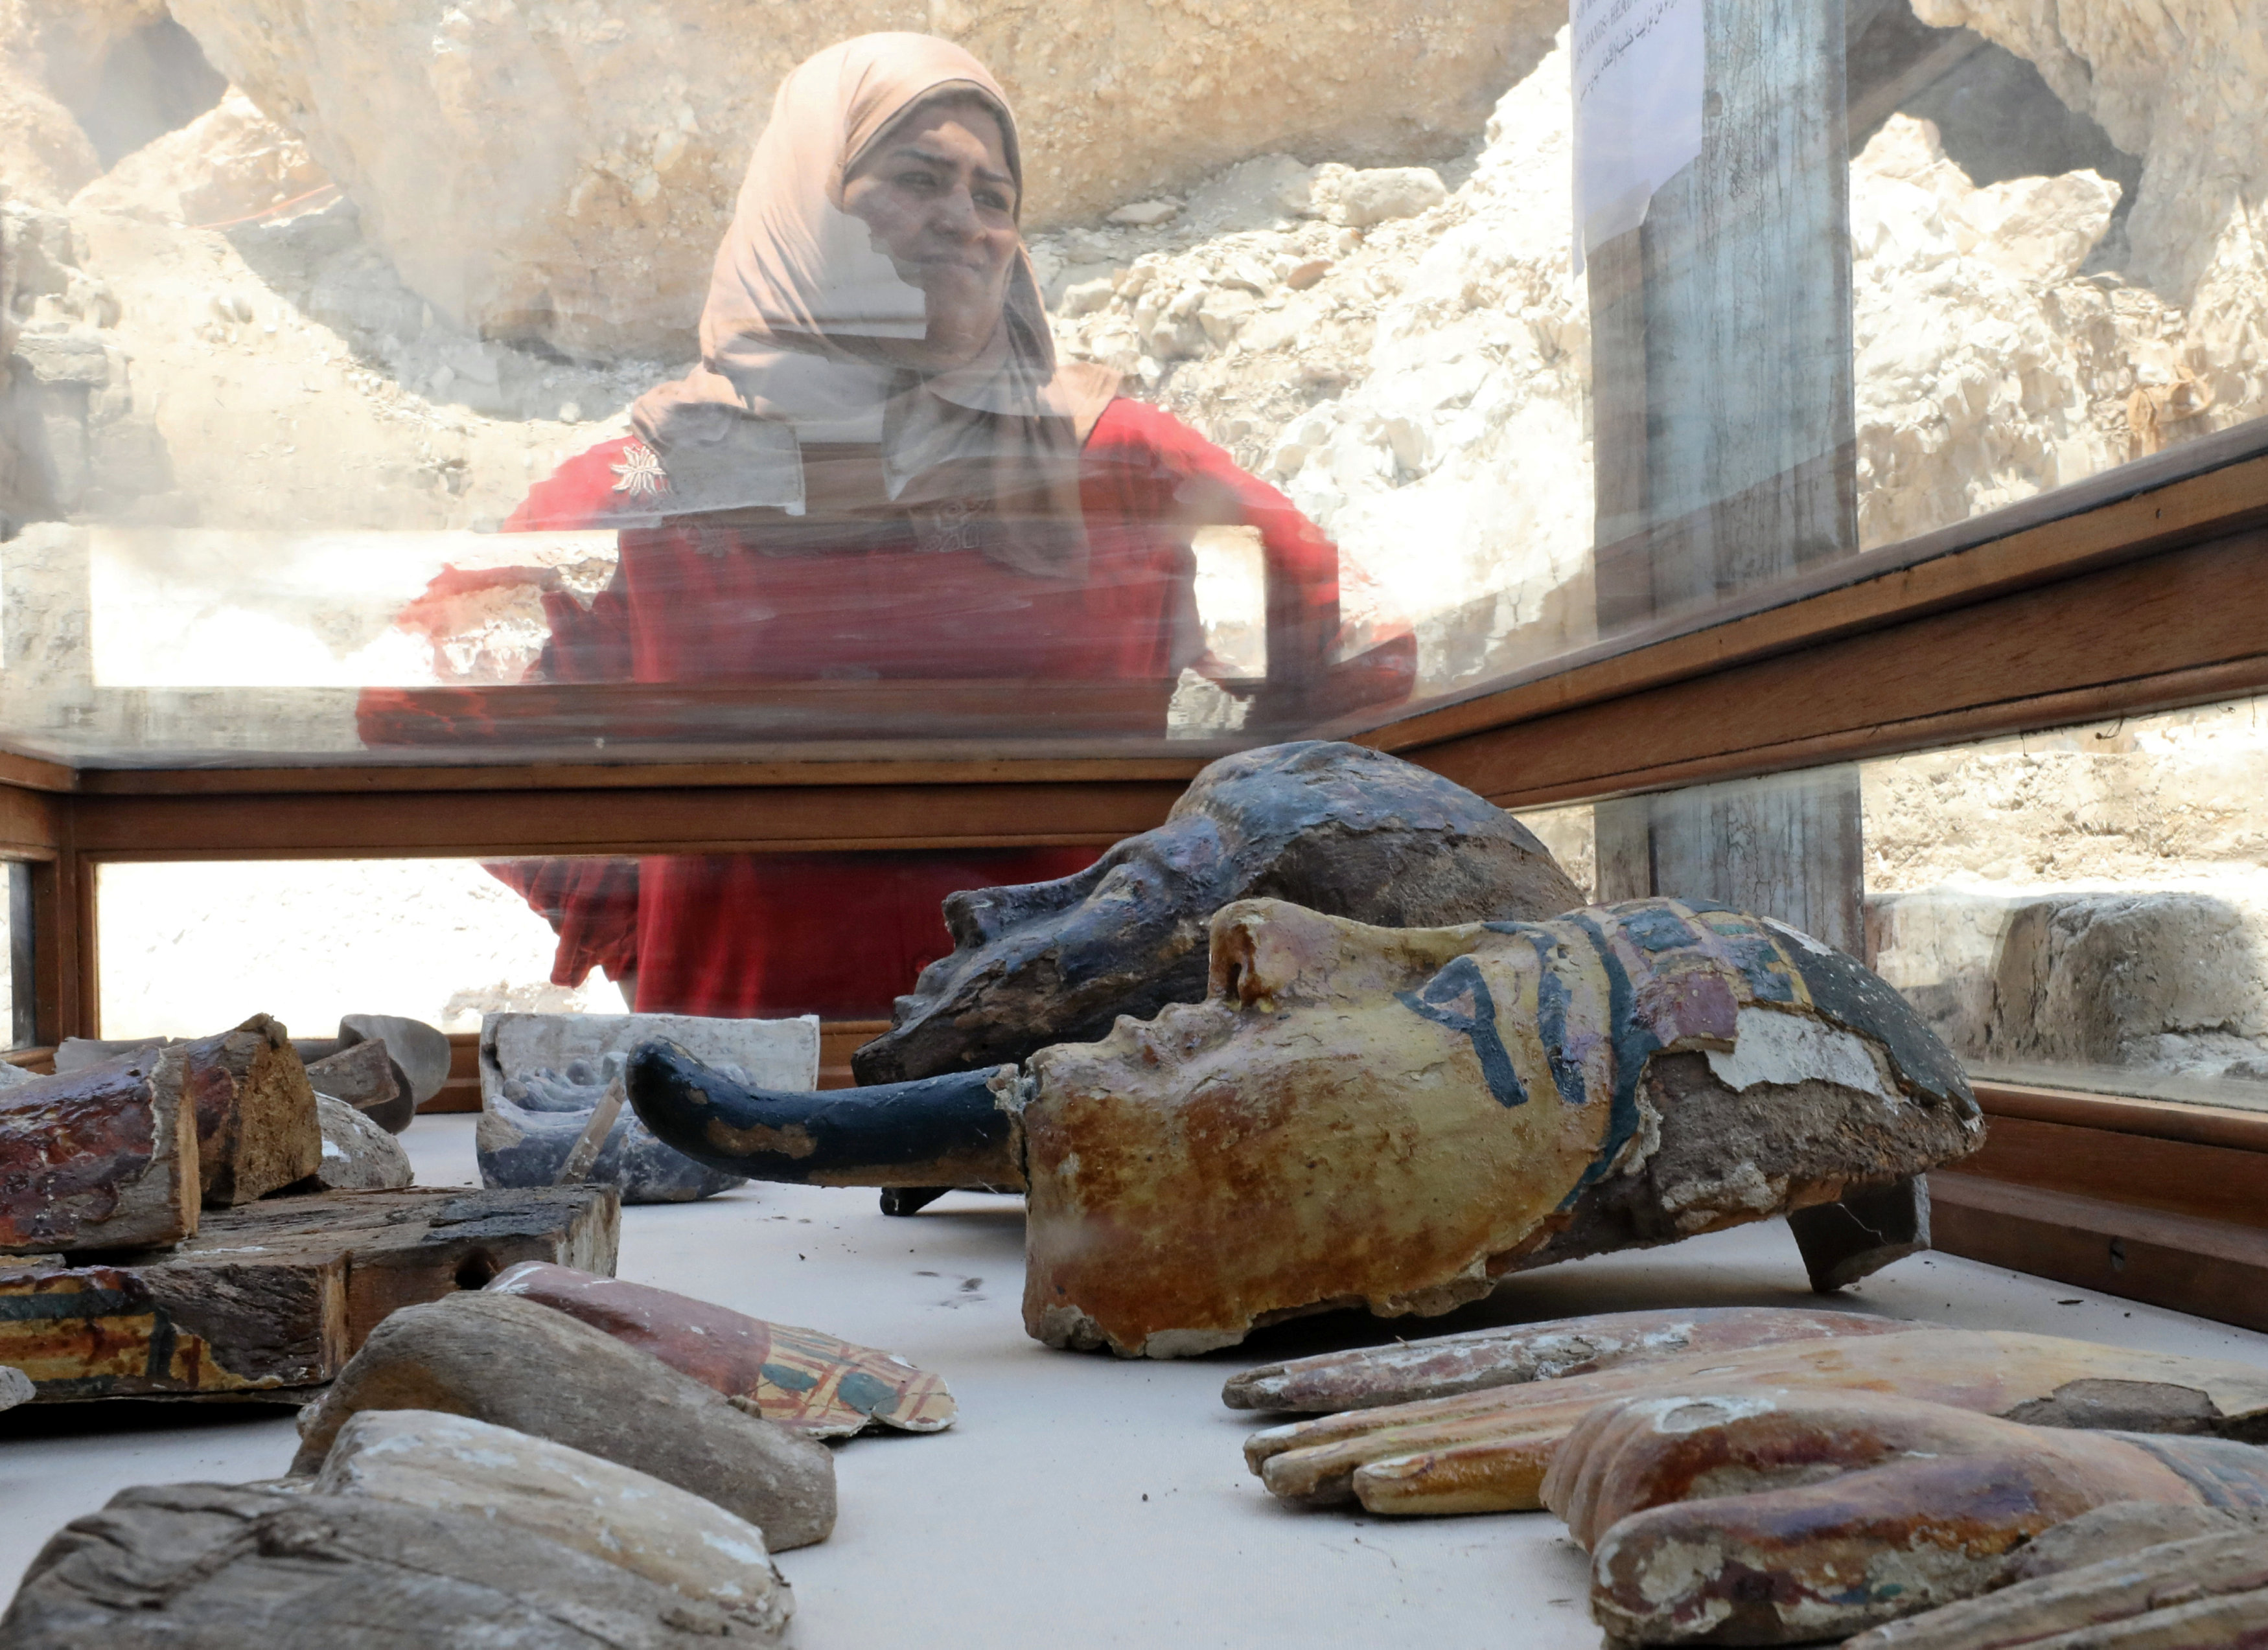 Egypt archaeologists unearth tomb of goldsmith who lived more than 3,000 years ago near Luxor